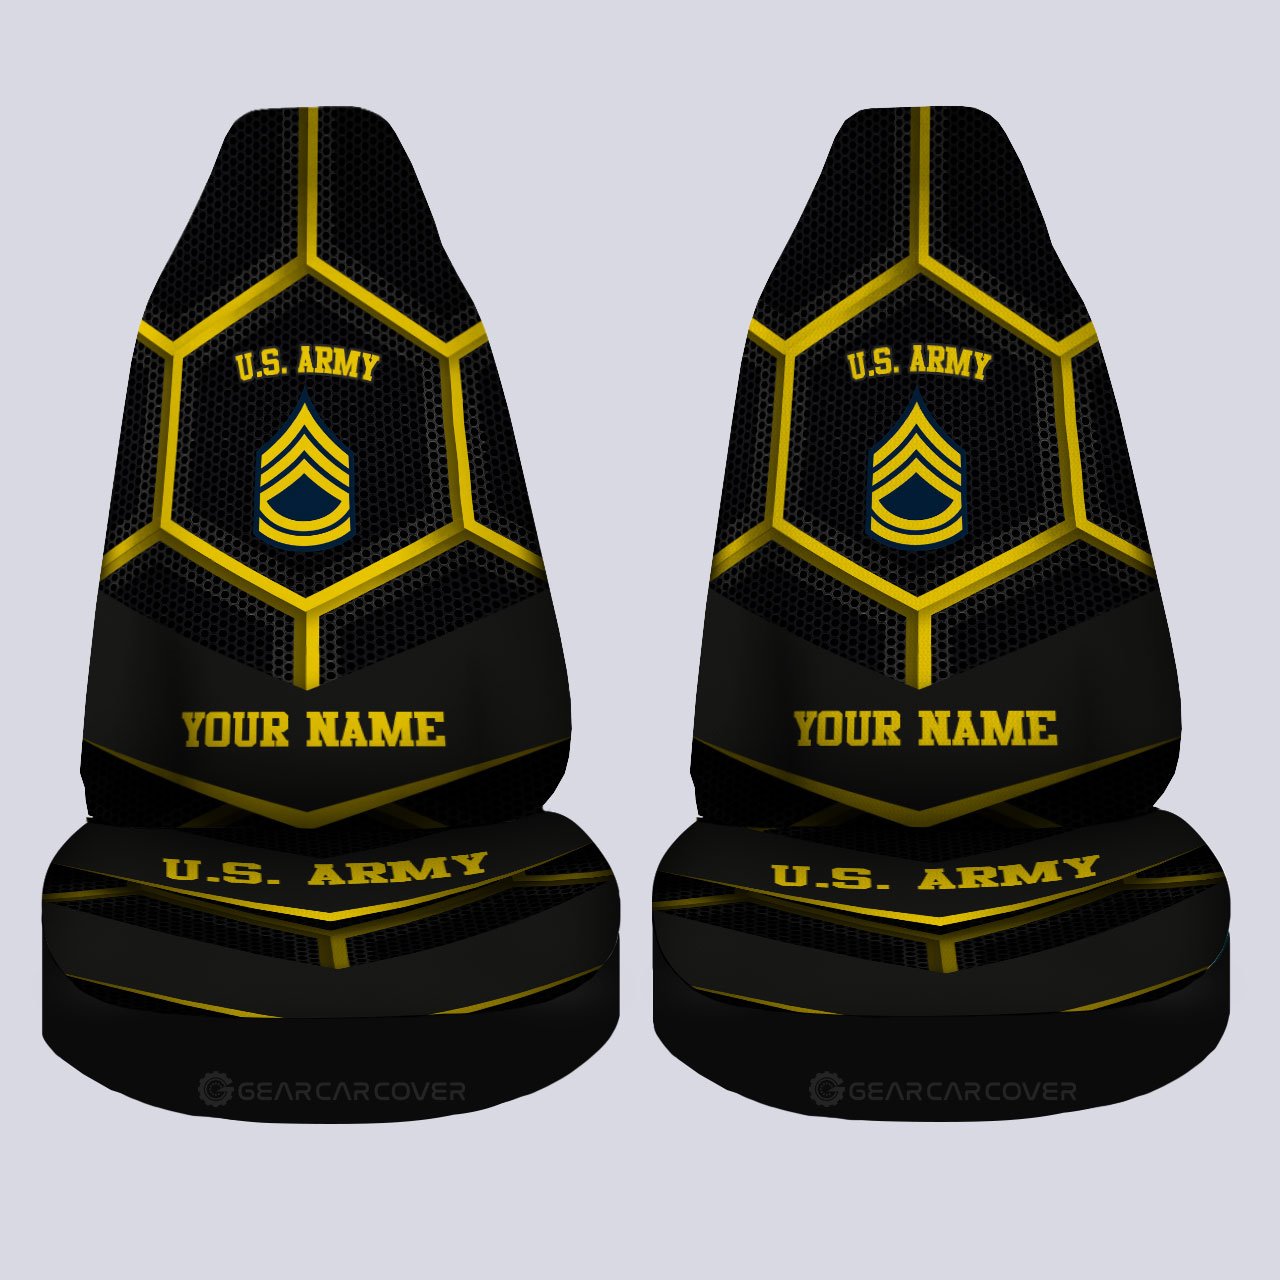 Personalized U.S Army Veterans Car Seat Covers Customized Name US Military Car Accessories - Gearcarcover - 4